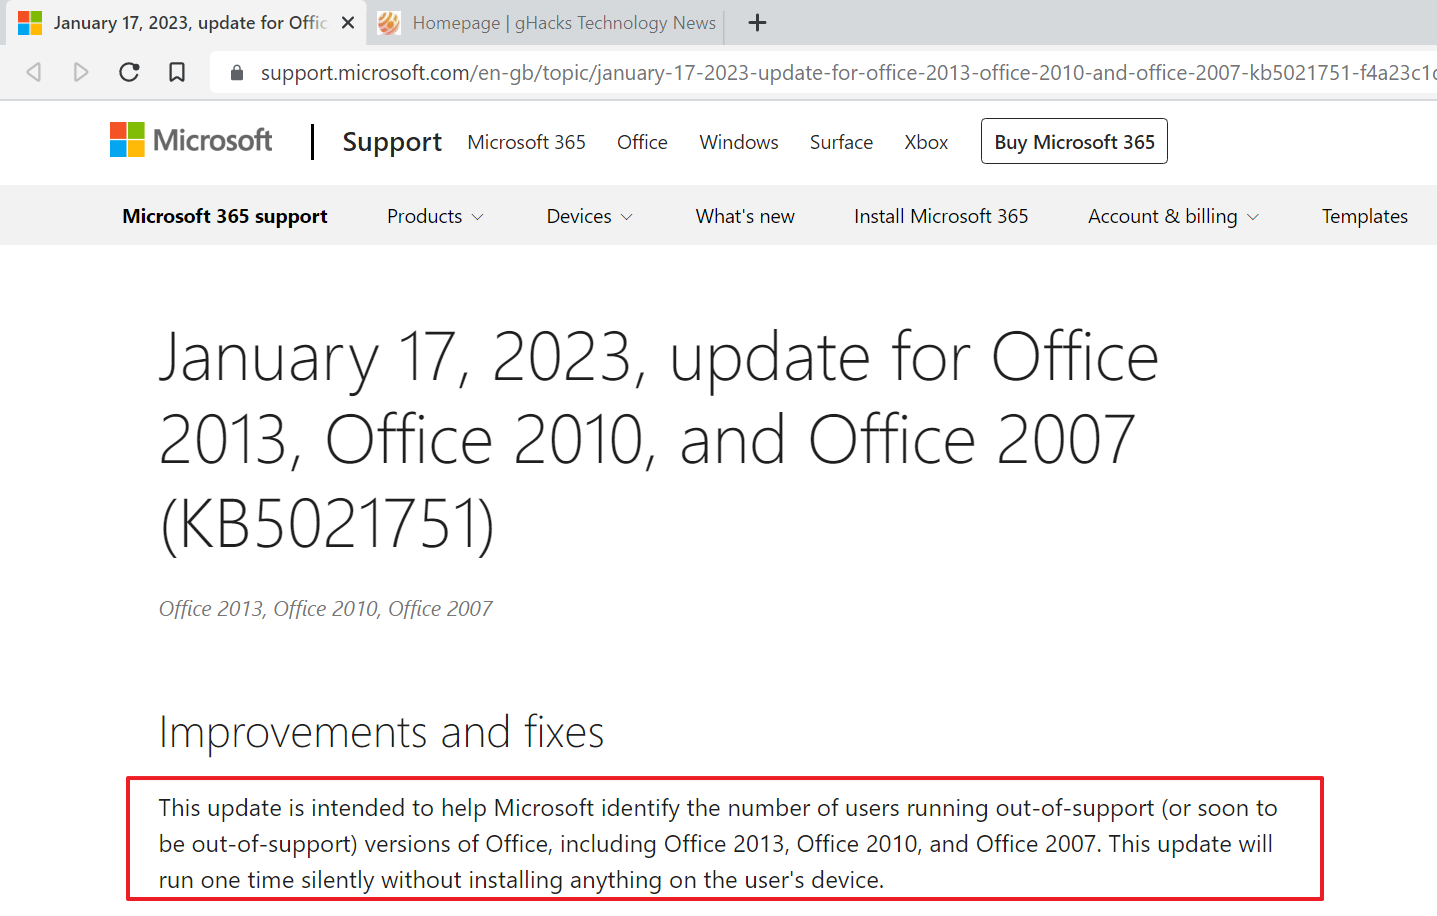 KB5021751 notifies Microsoft if an unsupported Office version is installed on Windows